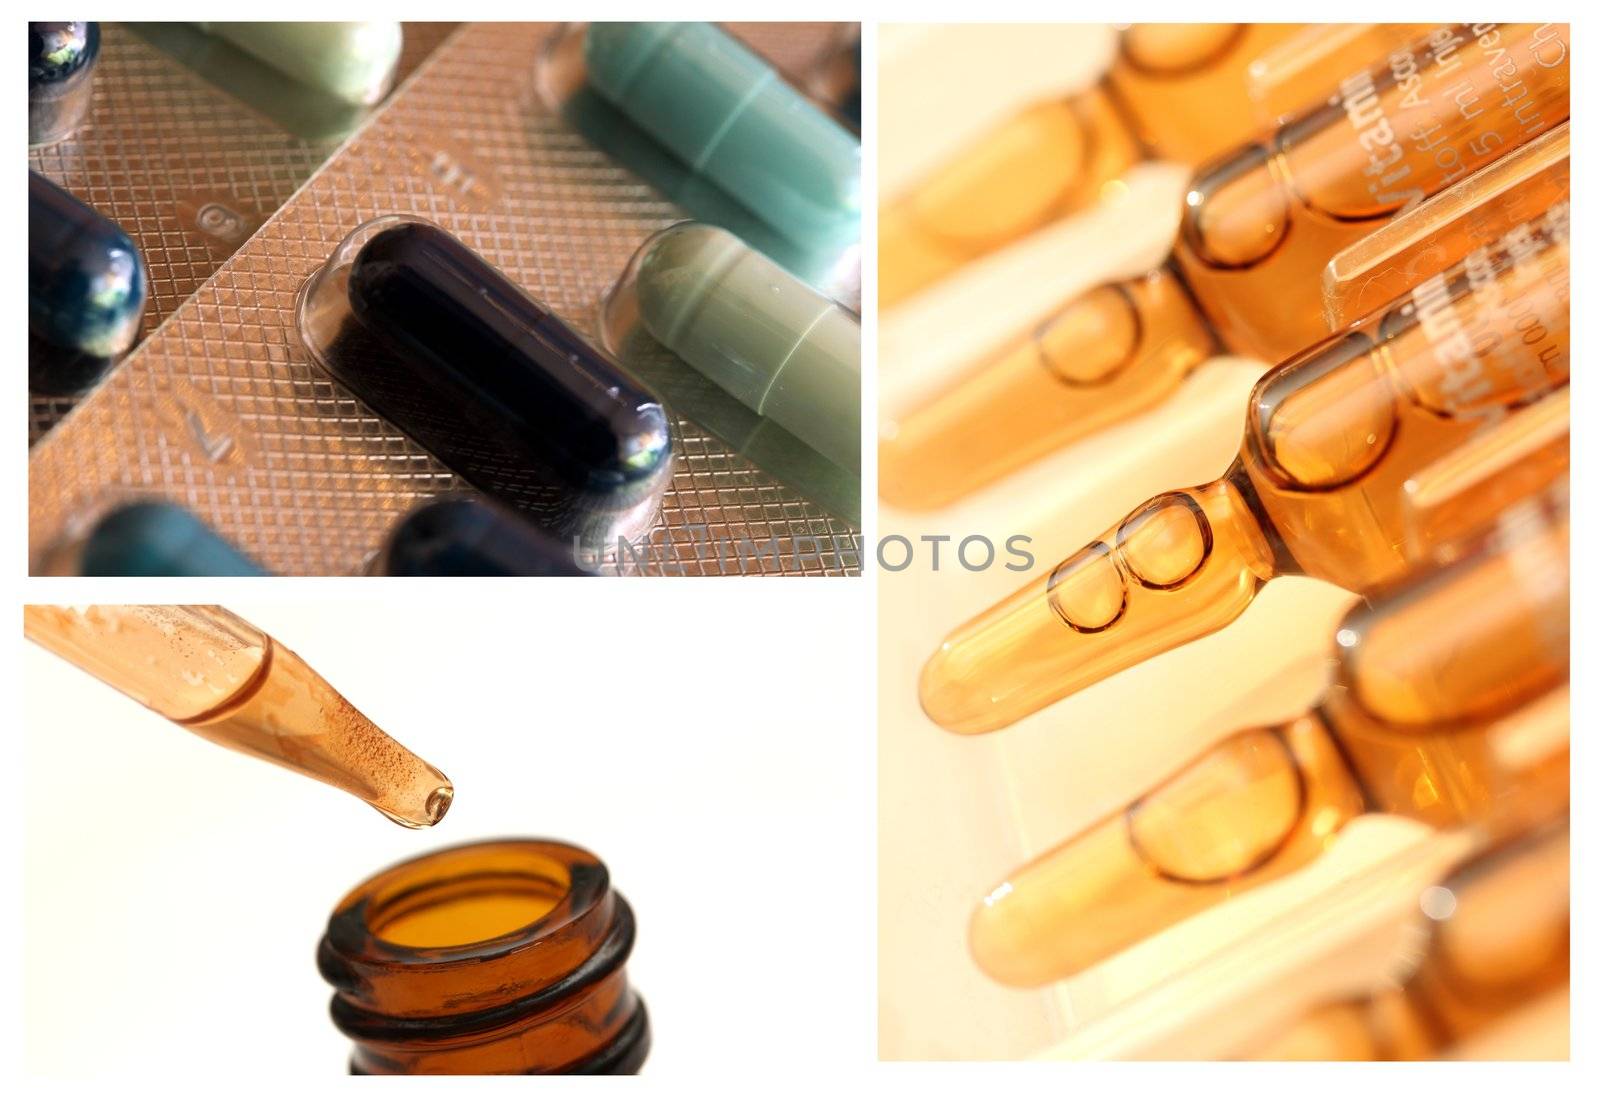 drug / medicine picture collection 2 by Teka77